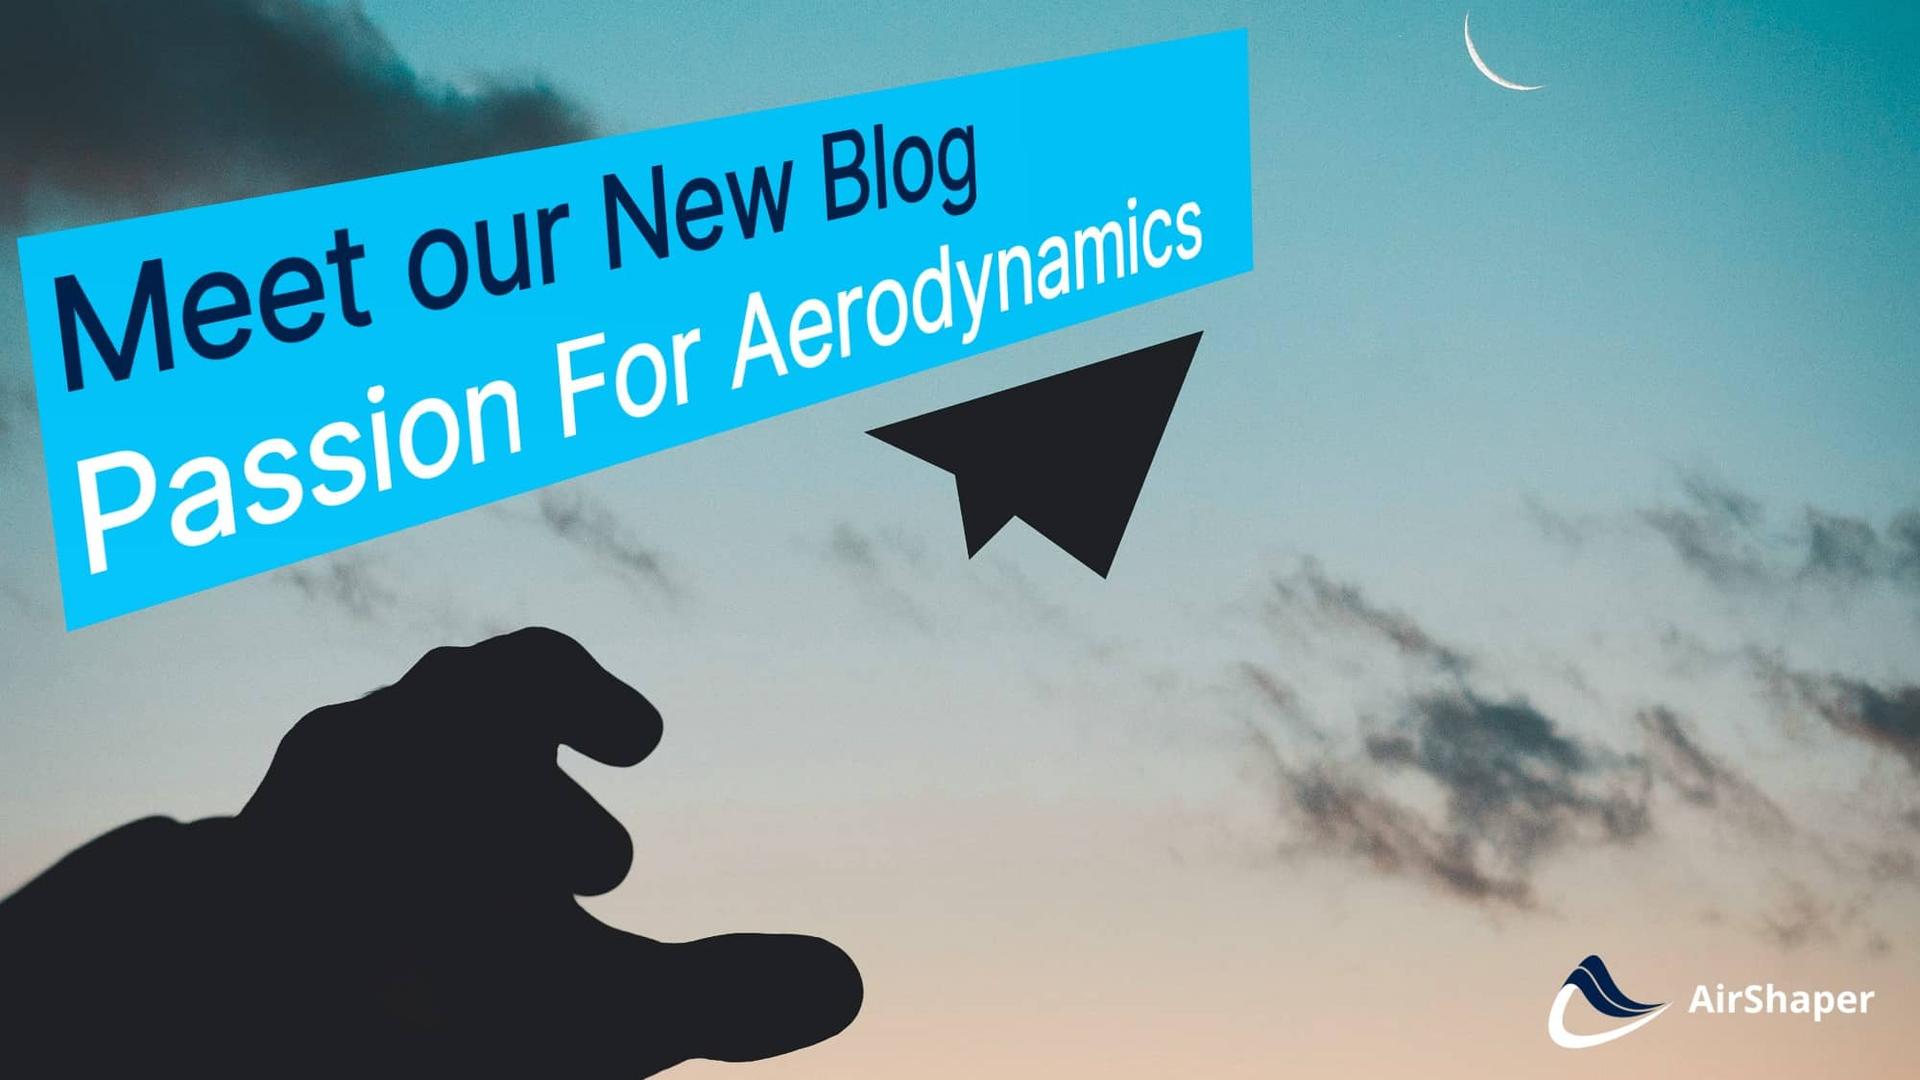 Passion For Aerodynamics - The AirShaper blog about anything related to airflow!